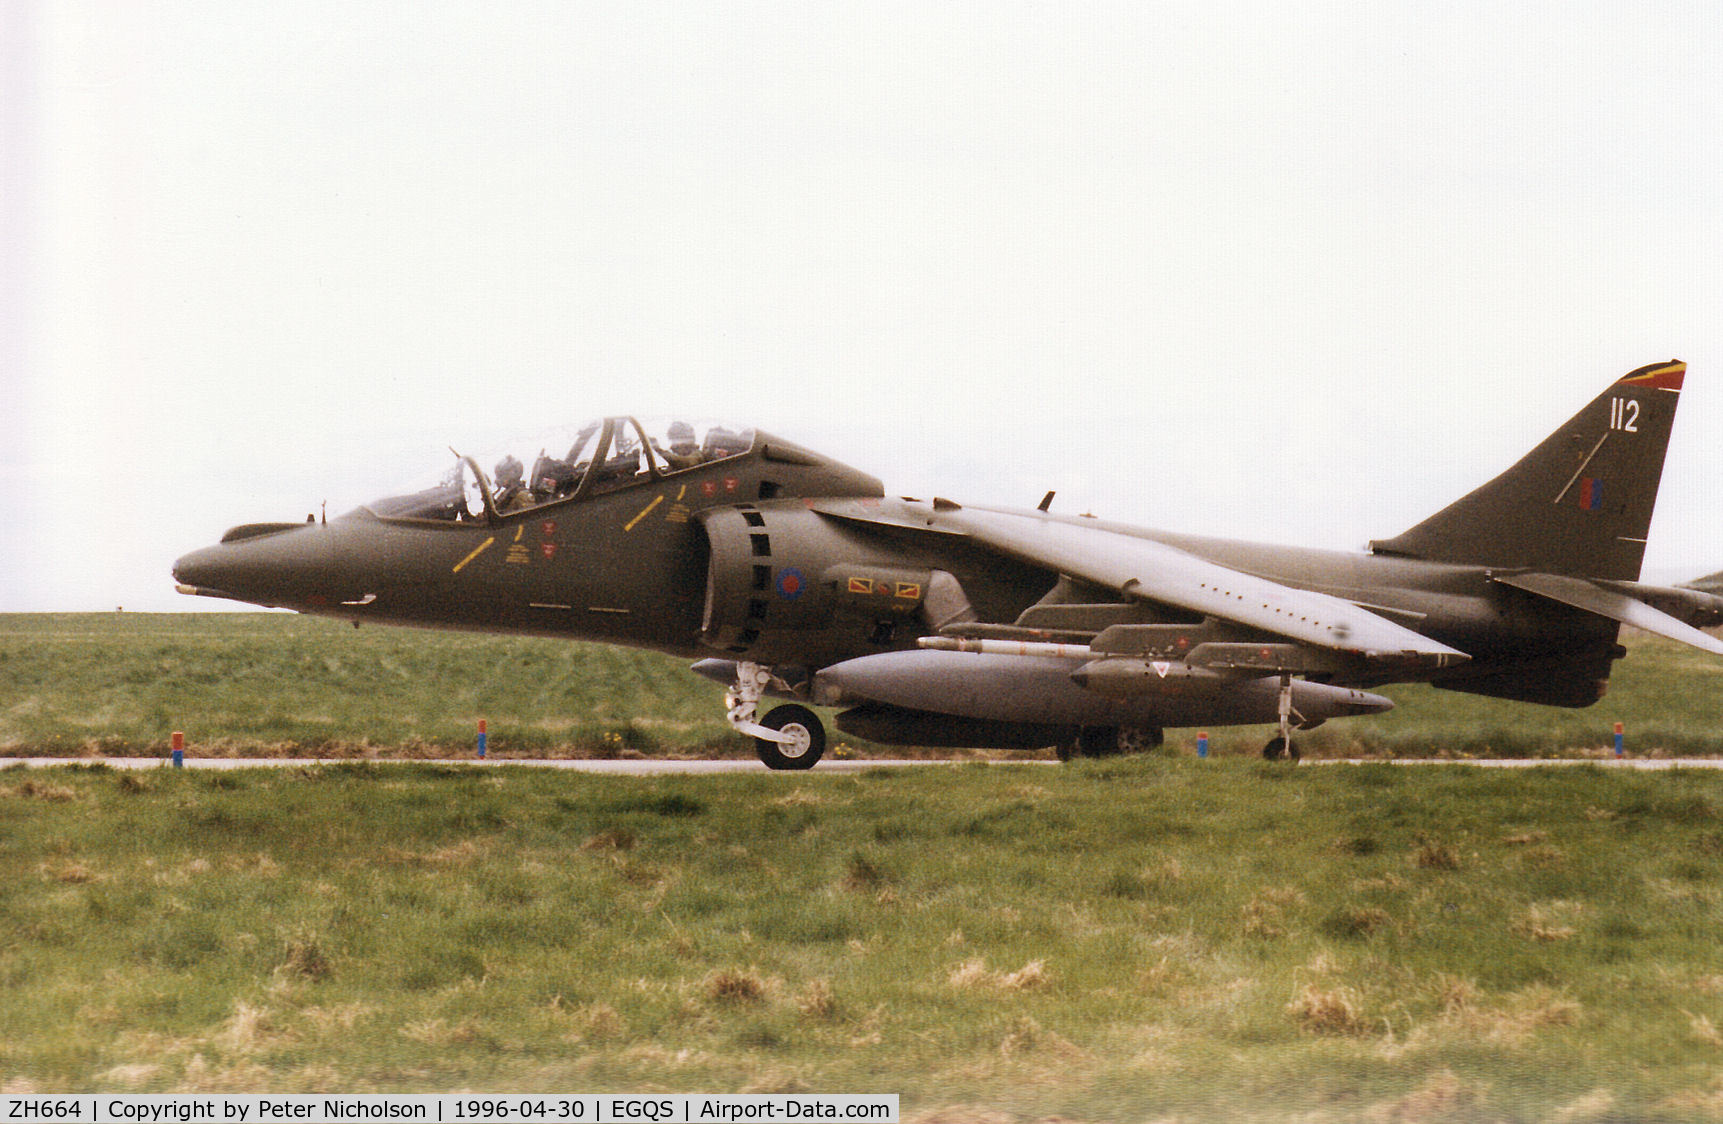 ZH664, 1995 British Aerospace Harrier T.10 C/N TX012, Harrier T.10 of 4 Squadron at RAF Wittering taxying to Runway 05 at RAF Lossiemouth in April 1996.